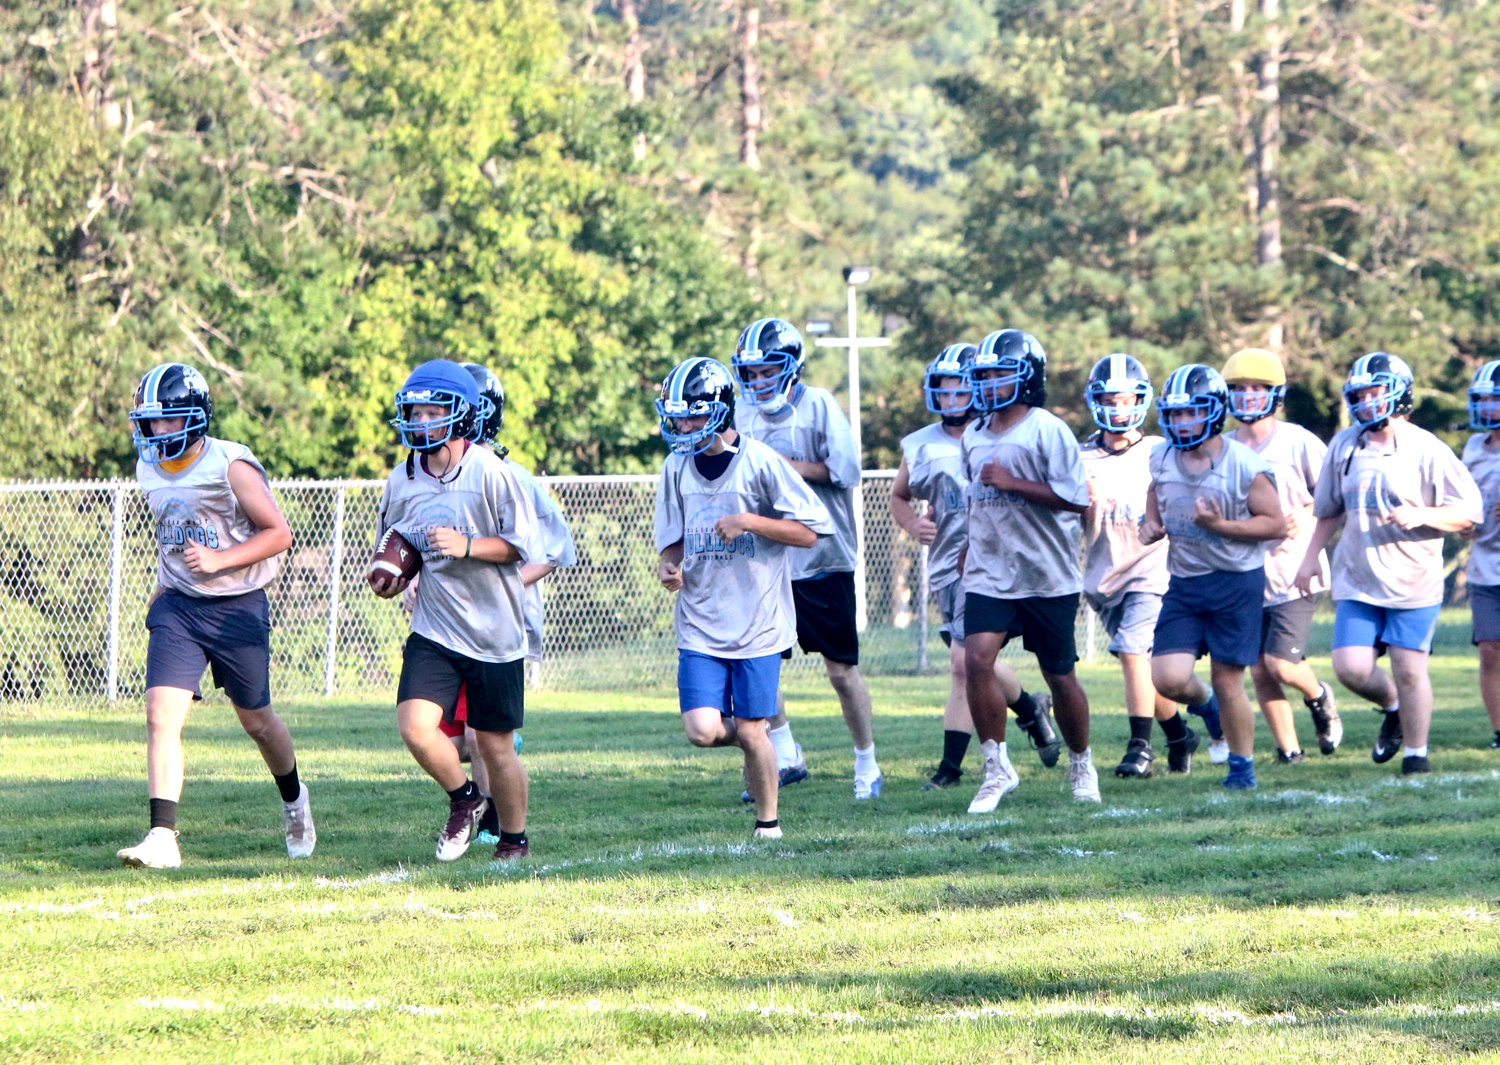 No matter what the sport, conditioning is key so it was a universal sight to witness teams running laps around the field. Here the Sullivan West Bulldogs football team begins their practice with laps around the practice field in Jeffersonville.